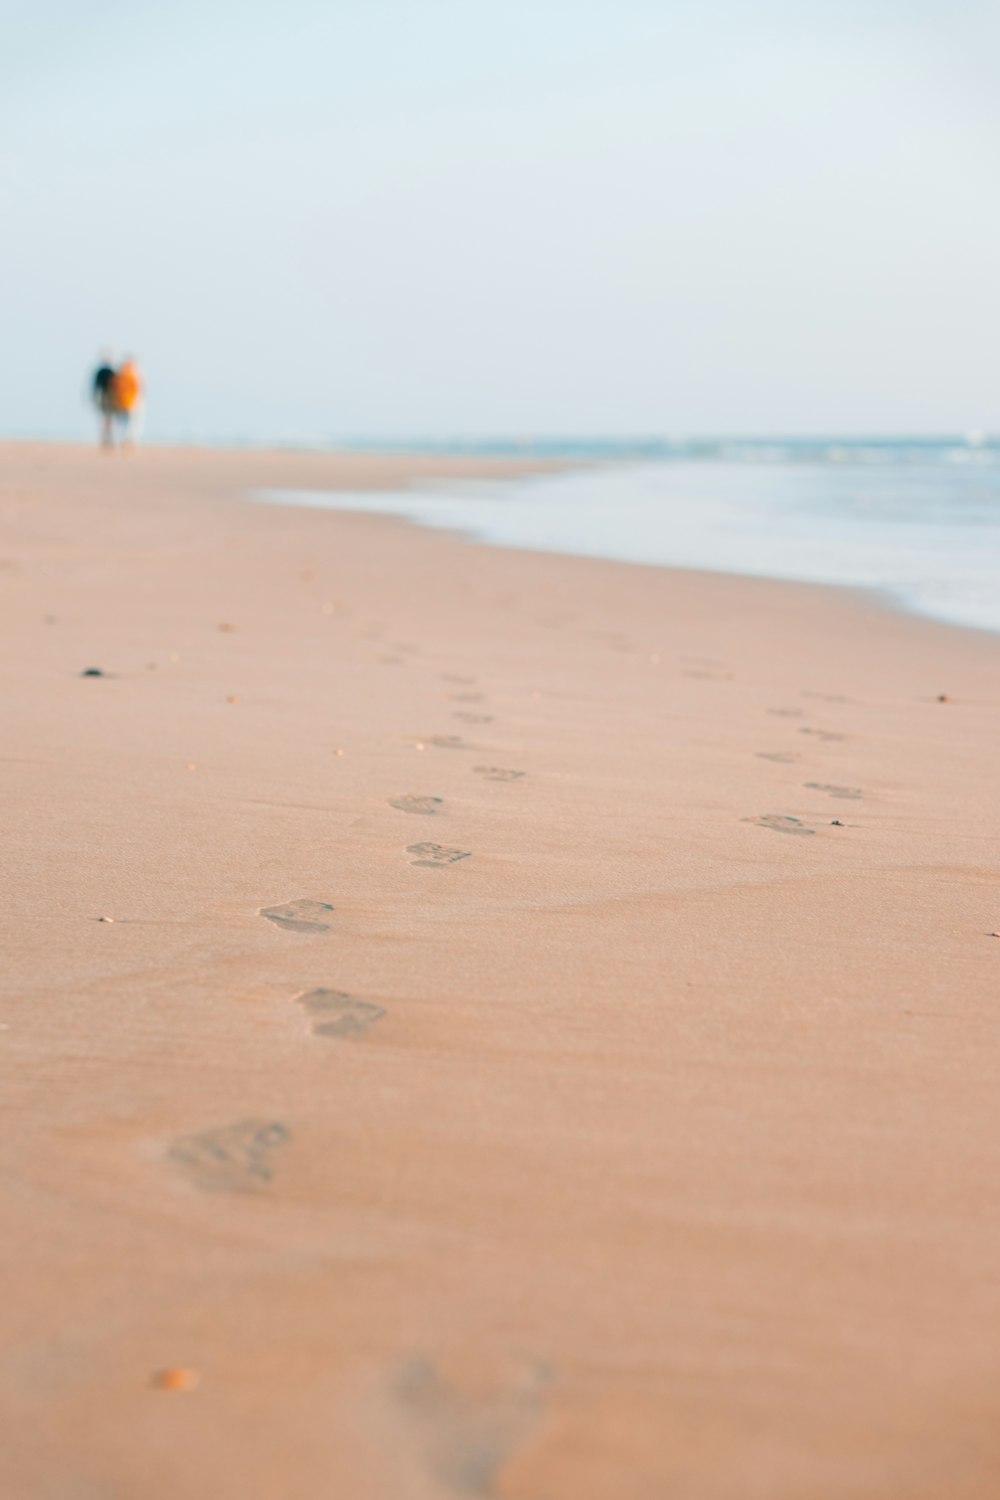 a person walking along a beach with footprints in the sand